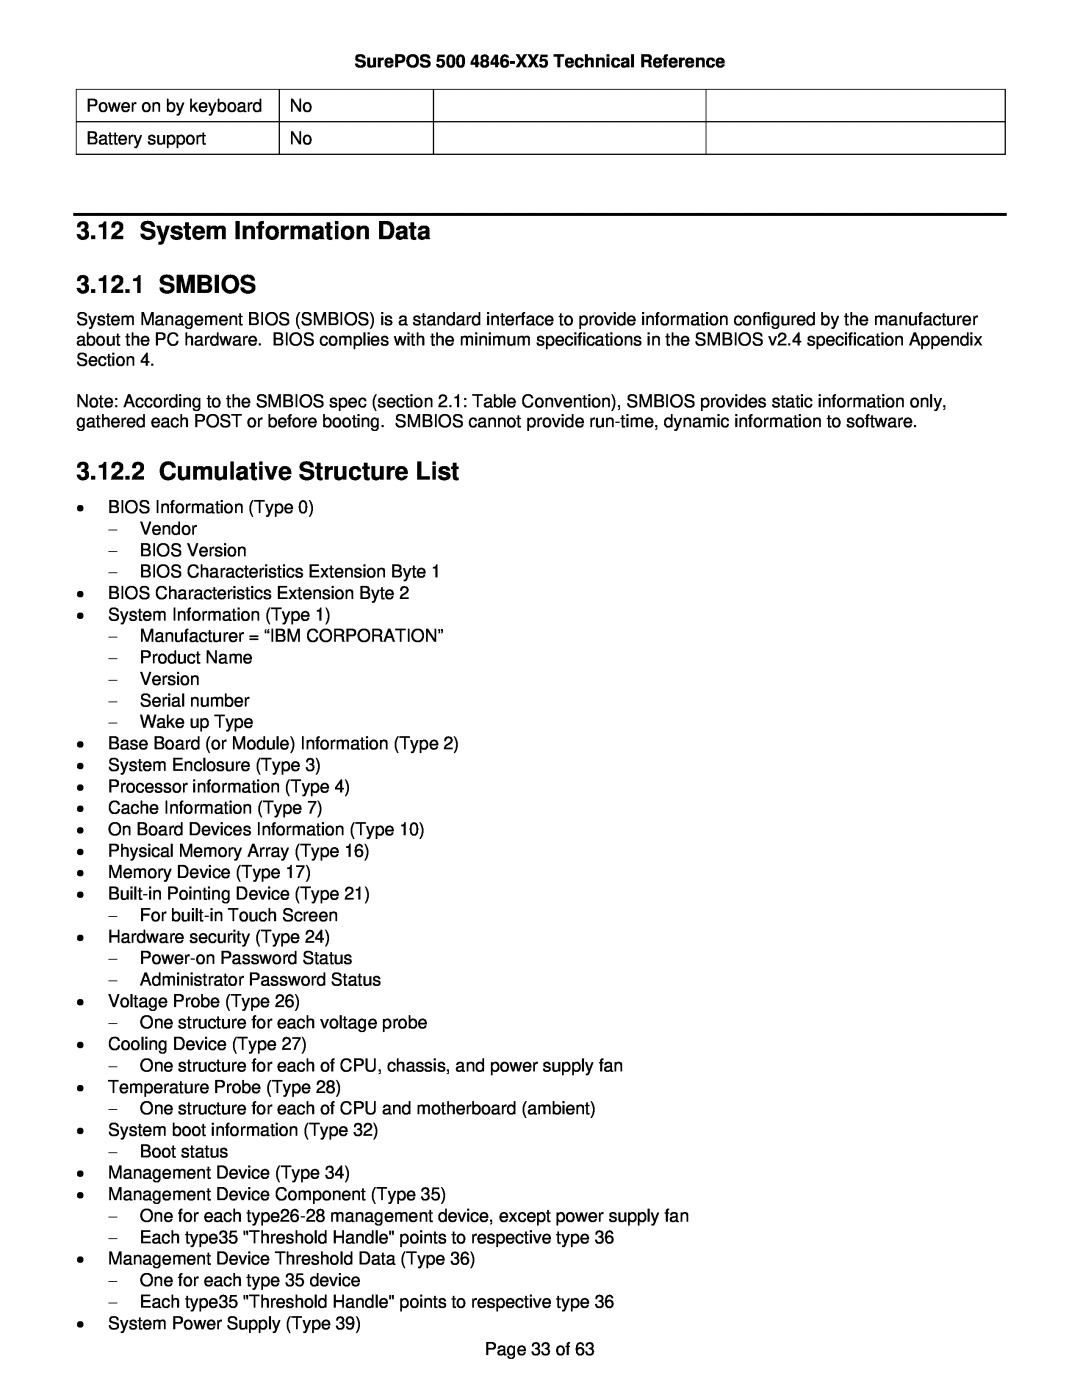 IBM manual System Information Data 3.12.1 SMBIOS, Cumulative Structure List, SurePOS 500 4846-XX5 Technical Reference 